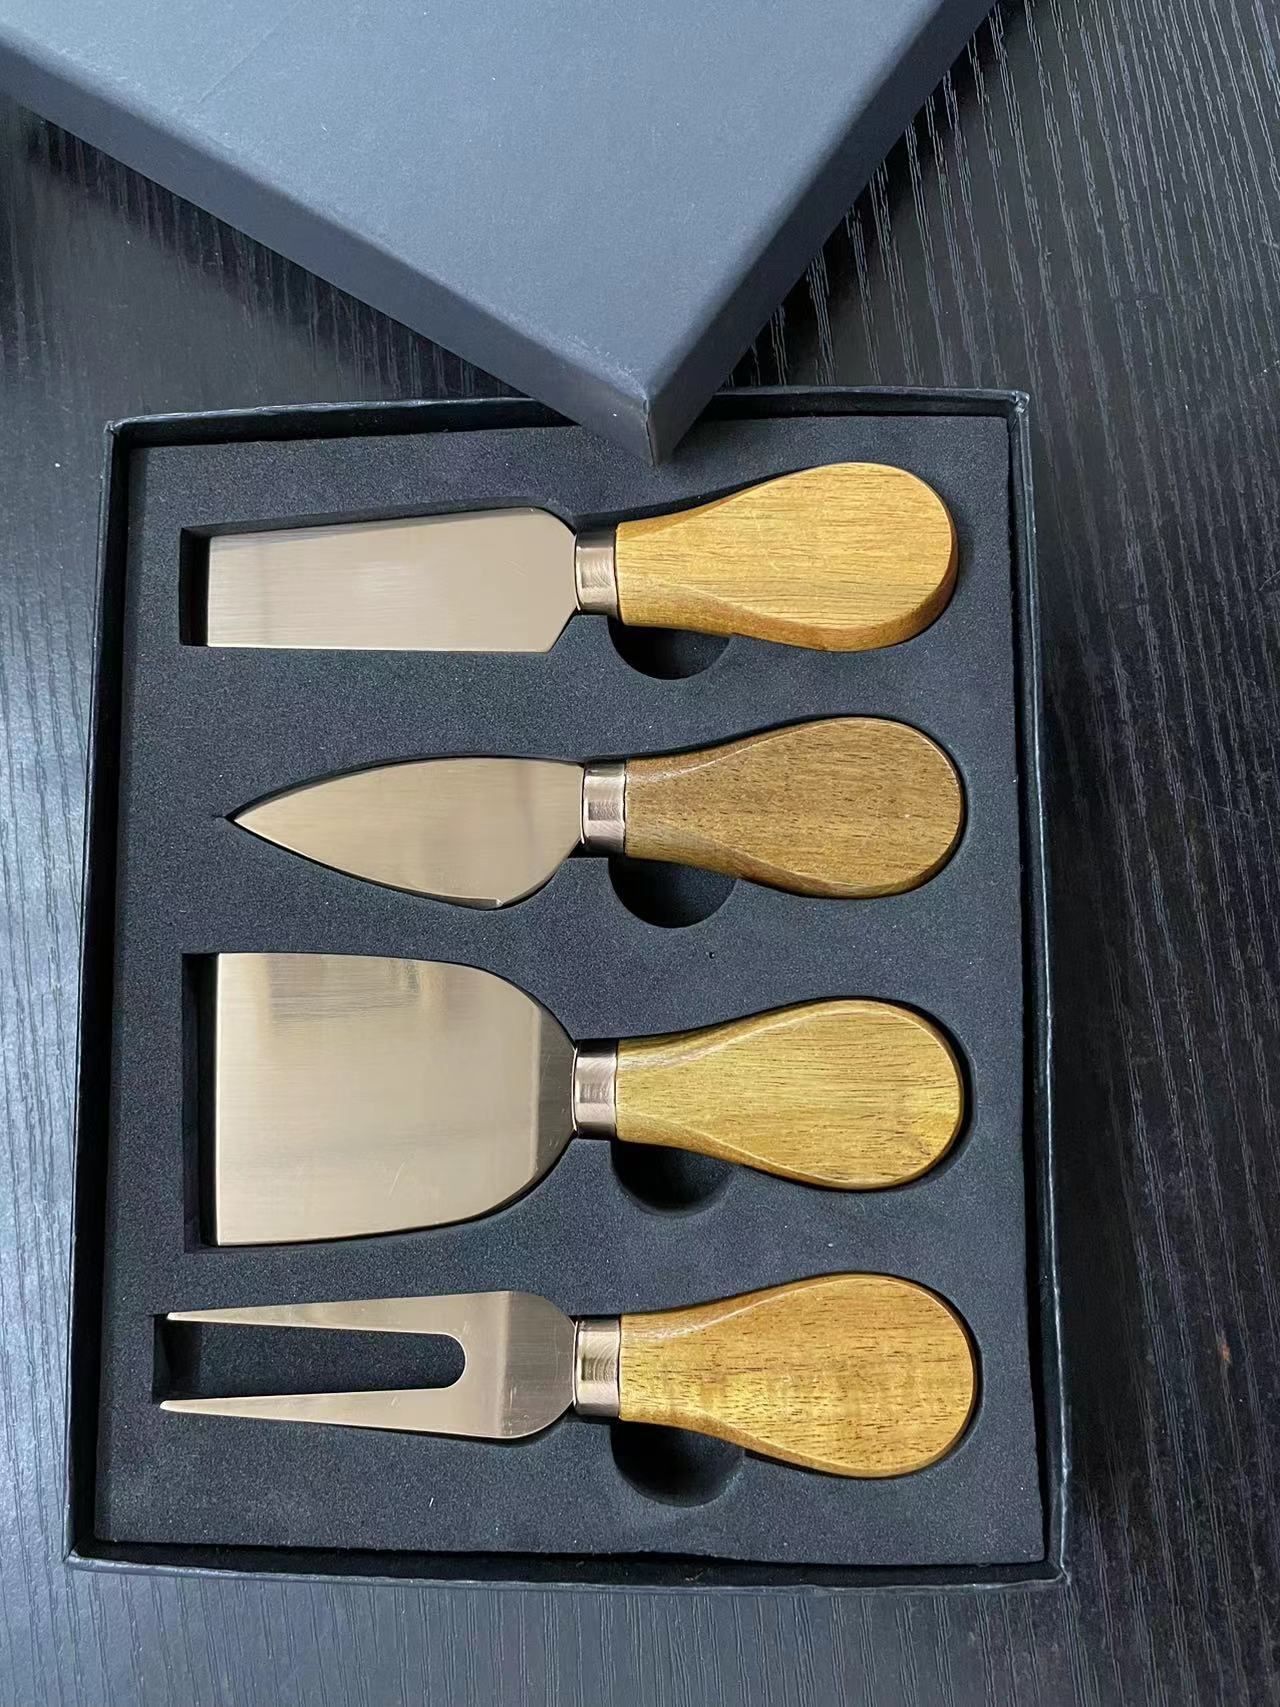 Stainless Steel Wooden Handle Cheese Knife 4-Piece Set Cheese Knife Cow Eva Boxed High-Grade Gift Packing Oak Handle Cover